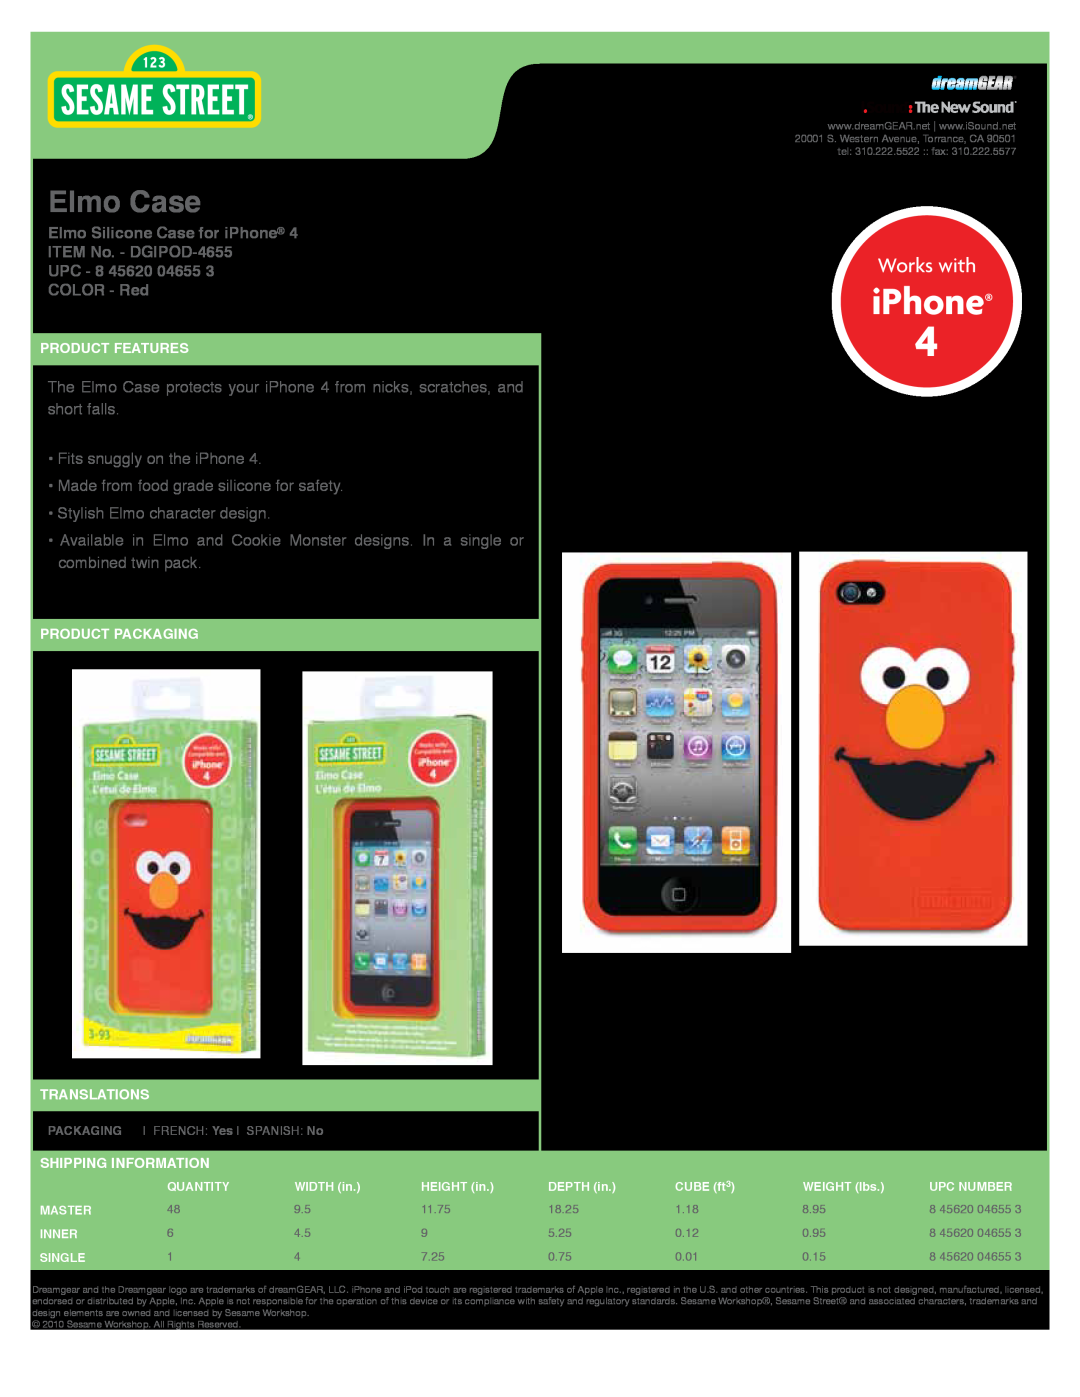 DreamGEAR manual Elmo Case, Works with, Elmo Silicone Case for iPhone ITEM No. - DGIPOD-4655, Product Features 